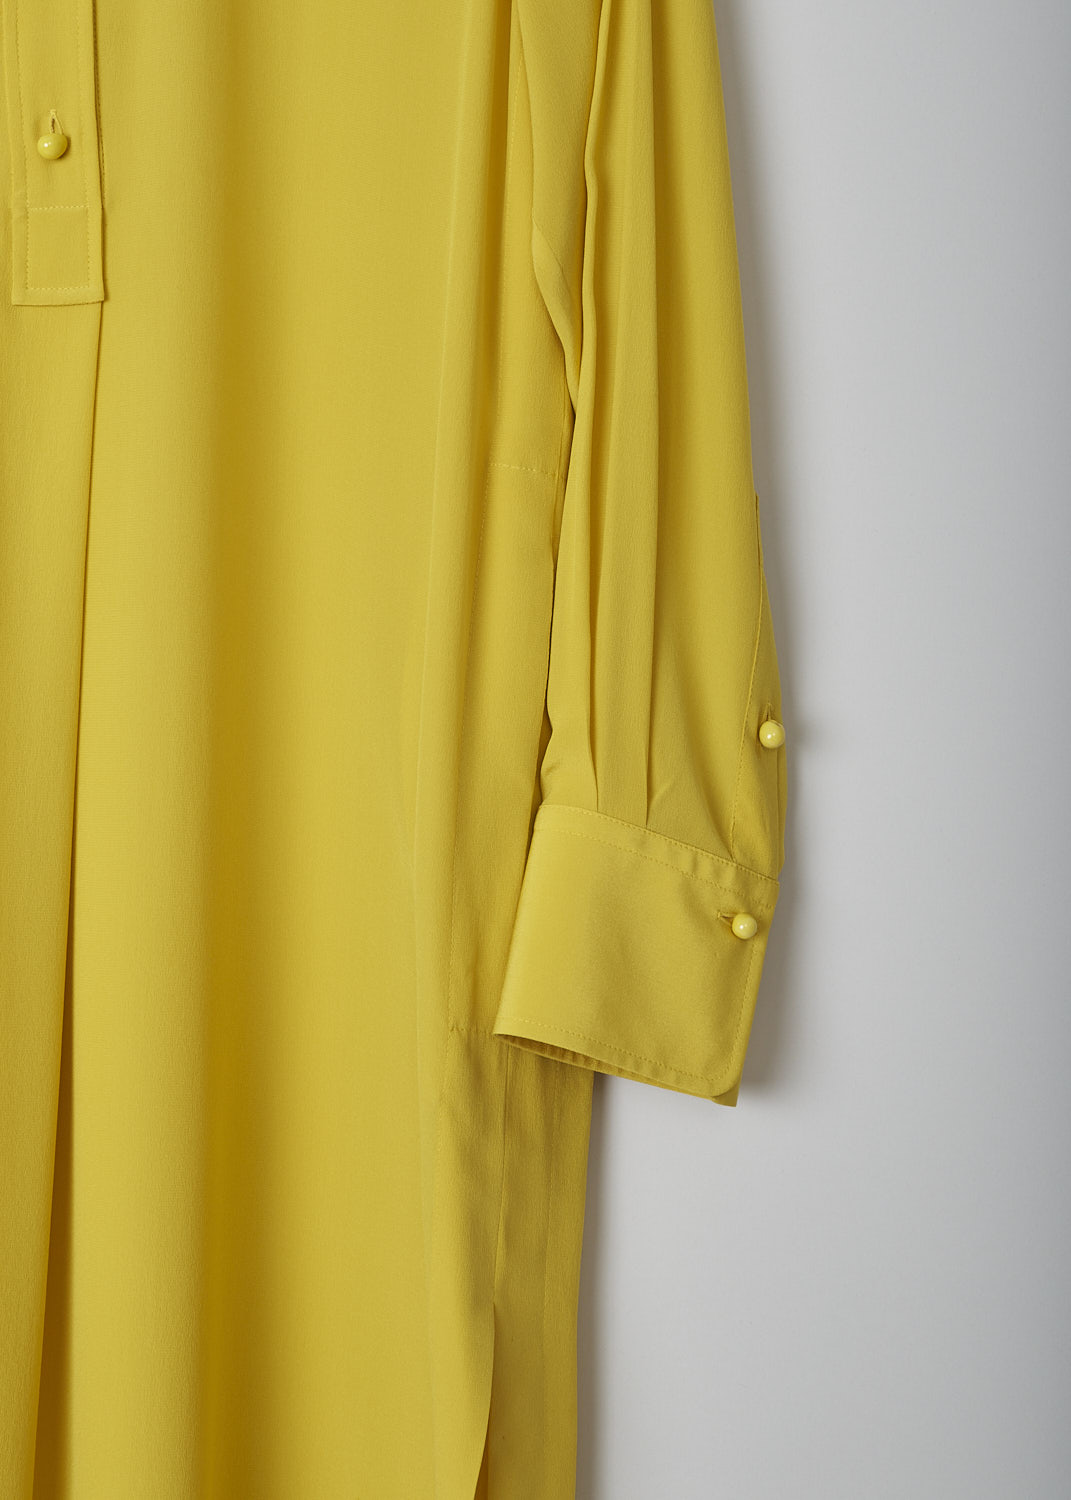 CHLOÃ‰, MUSTARD YELLOW DRESS, CHC22URO64004732_MUSTARD, Yellow, Detail 1, This mustard yellow shirt dress has a spread collar and a front button placket with ceramic buttons that reaches about halfway down. The long sleeves have cuffs with those same ceramic buttons. Slanted pockets are concealed in the side seam. The dress has a straight hemline with side slits. In the back, the dress has a centre box pleat. 
 
